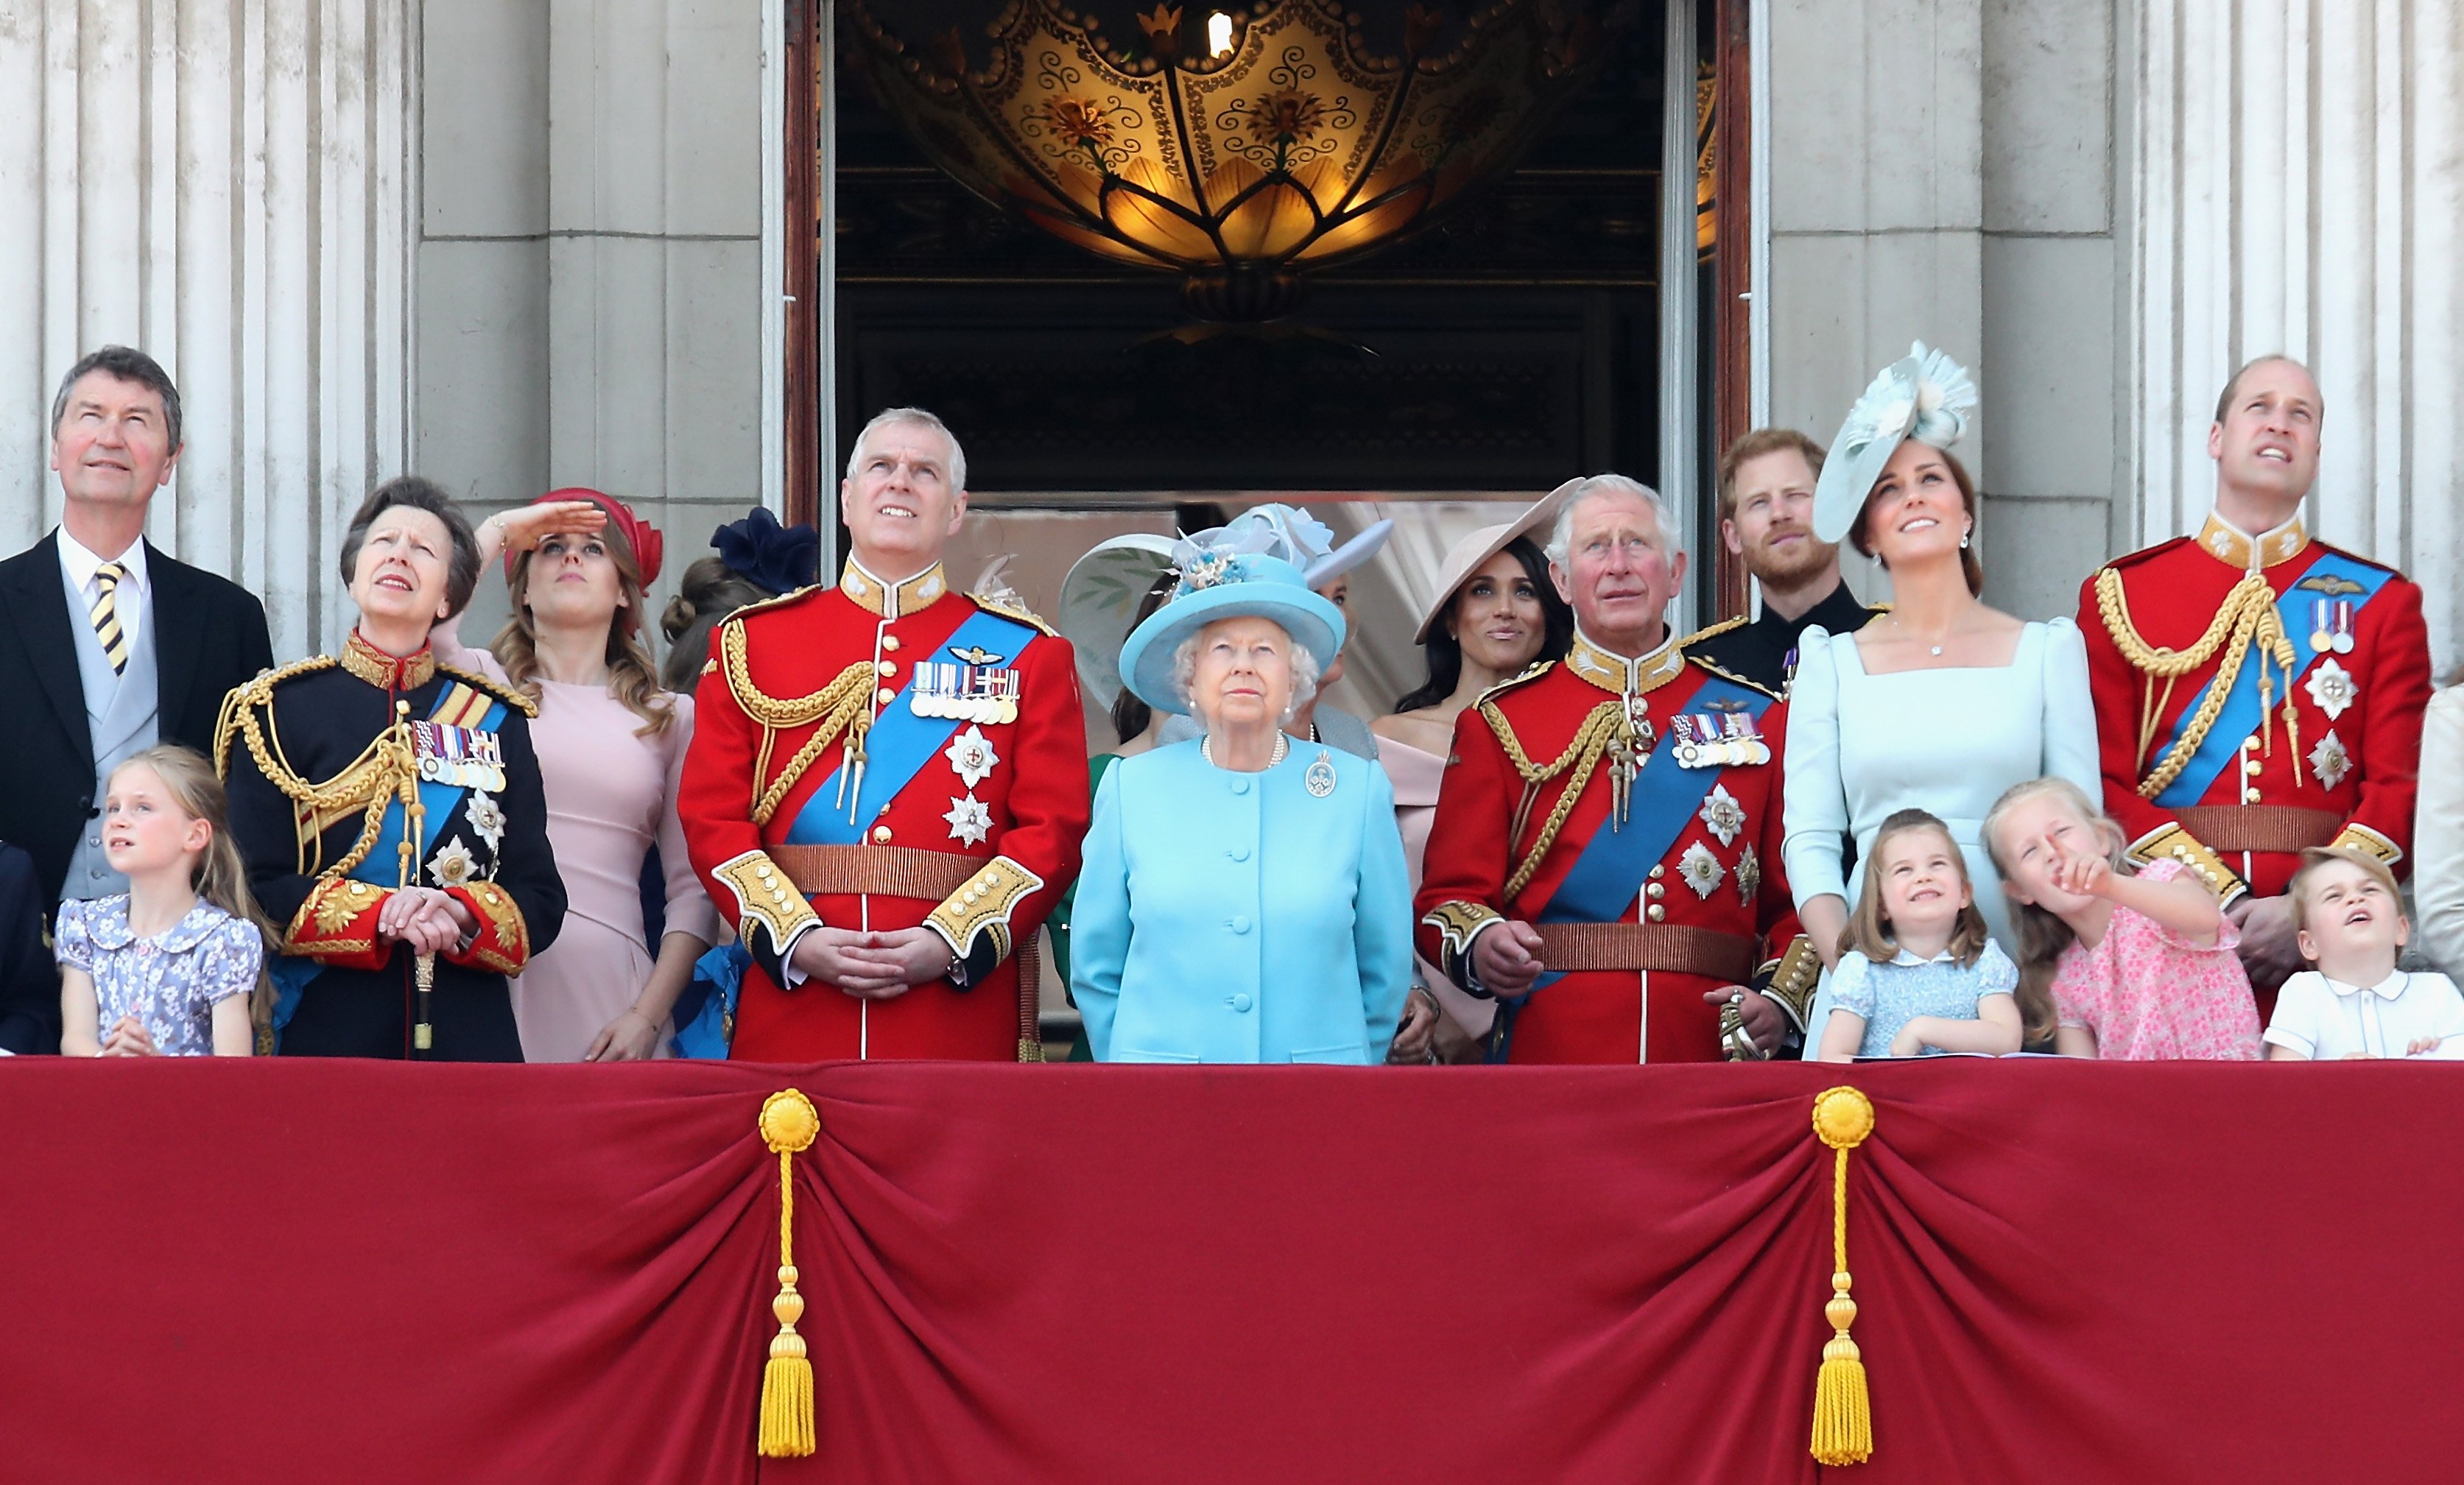  June 9, 2018 all of the royal family gathered to watch the flypast on the balcony of Buckingham Palace during Trooping The Colour.| Photo: Getty Images